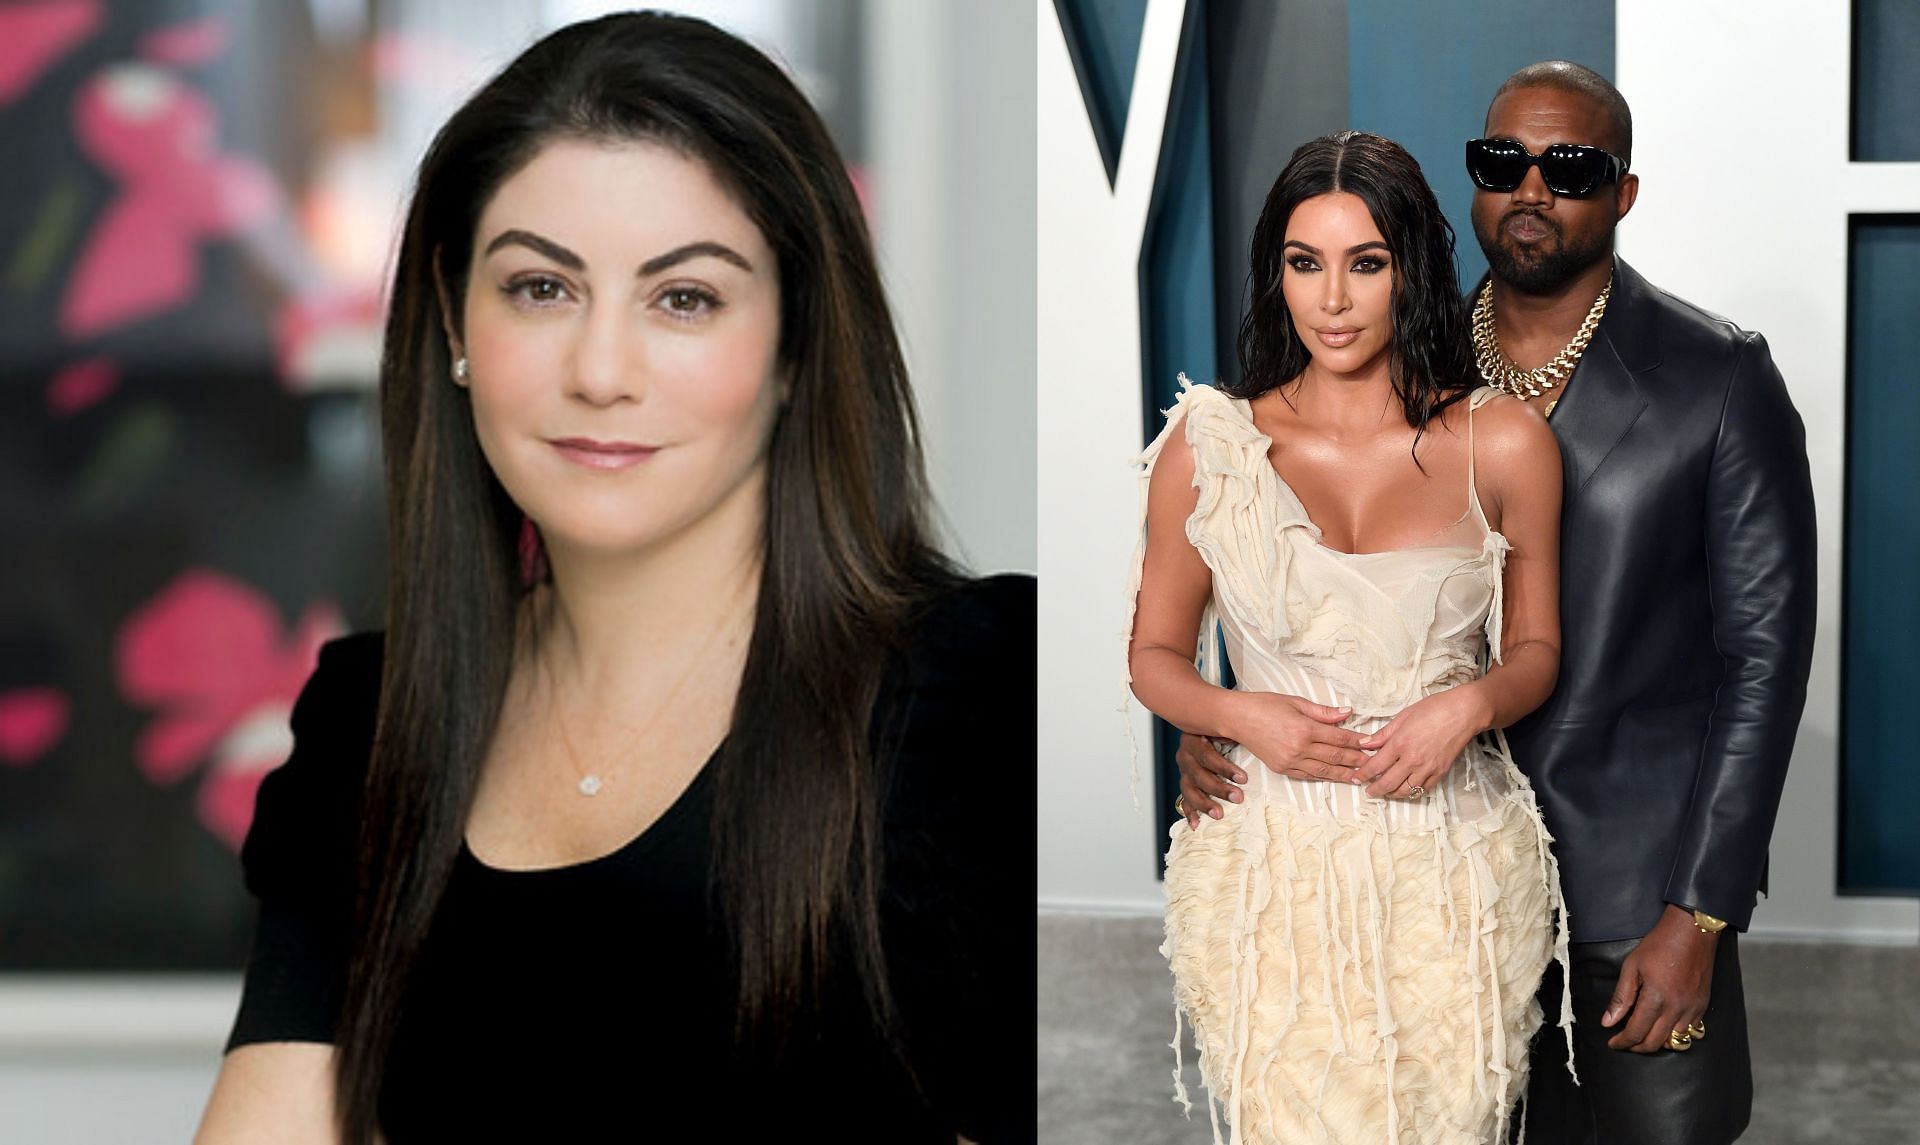 Samantha Spector to represent Kanye West amid ongoing divorce with Kim Kardashian (Image via Spector Law Firm, and Karwai Tang/Getty Images)